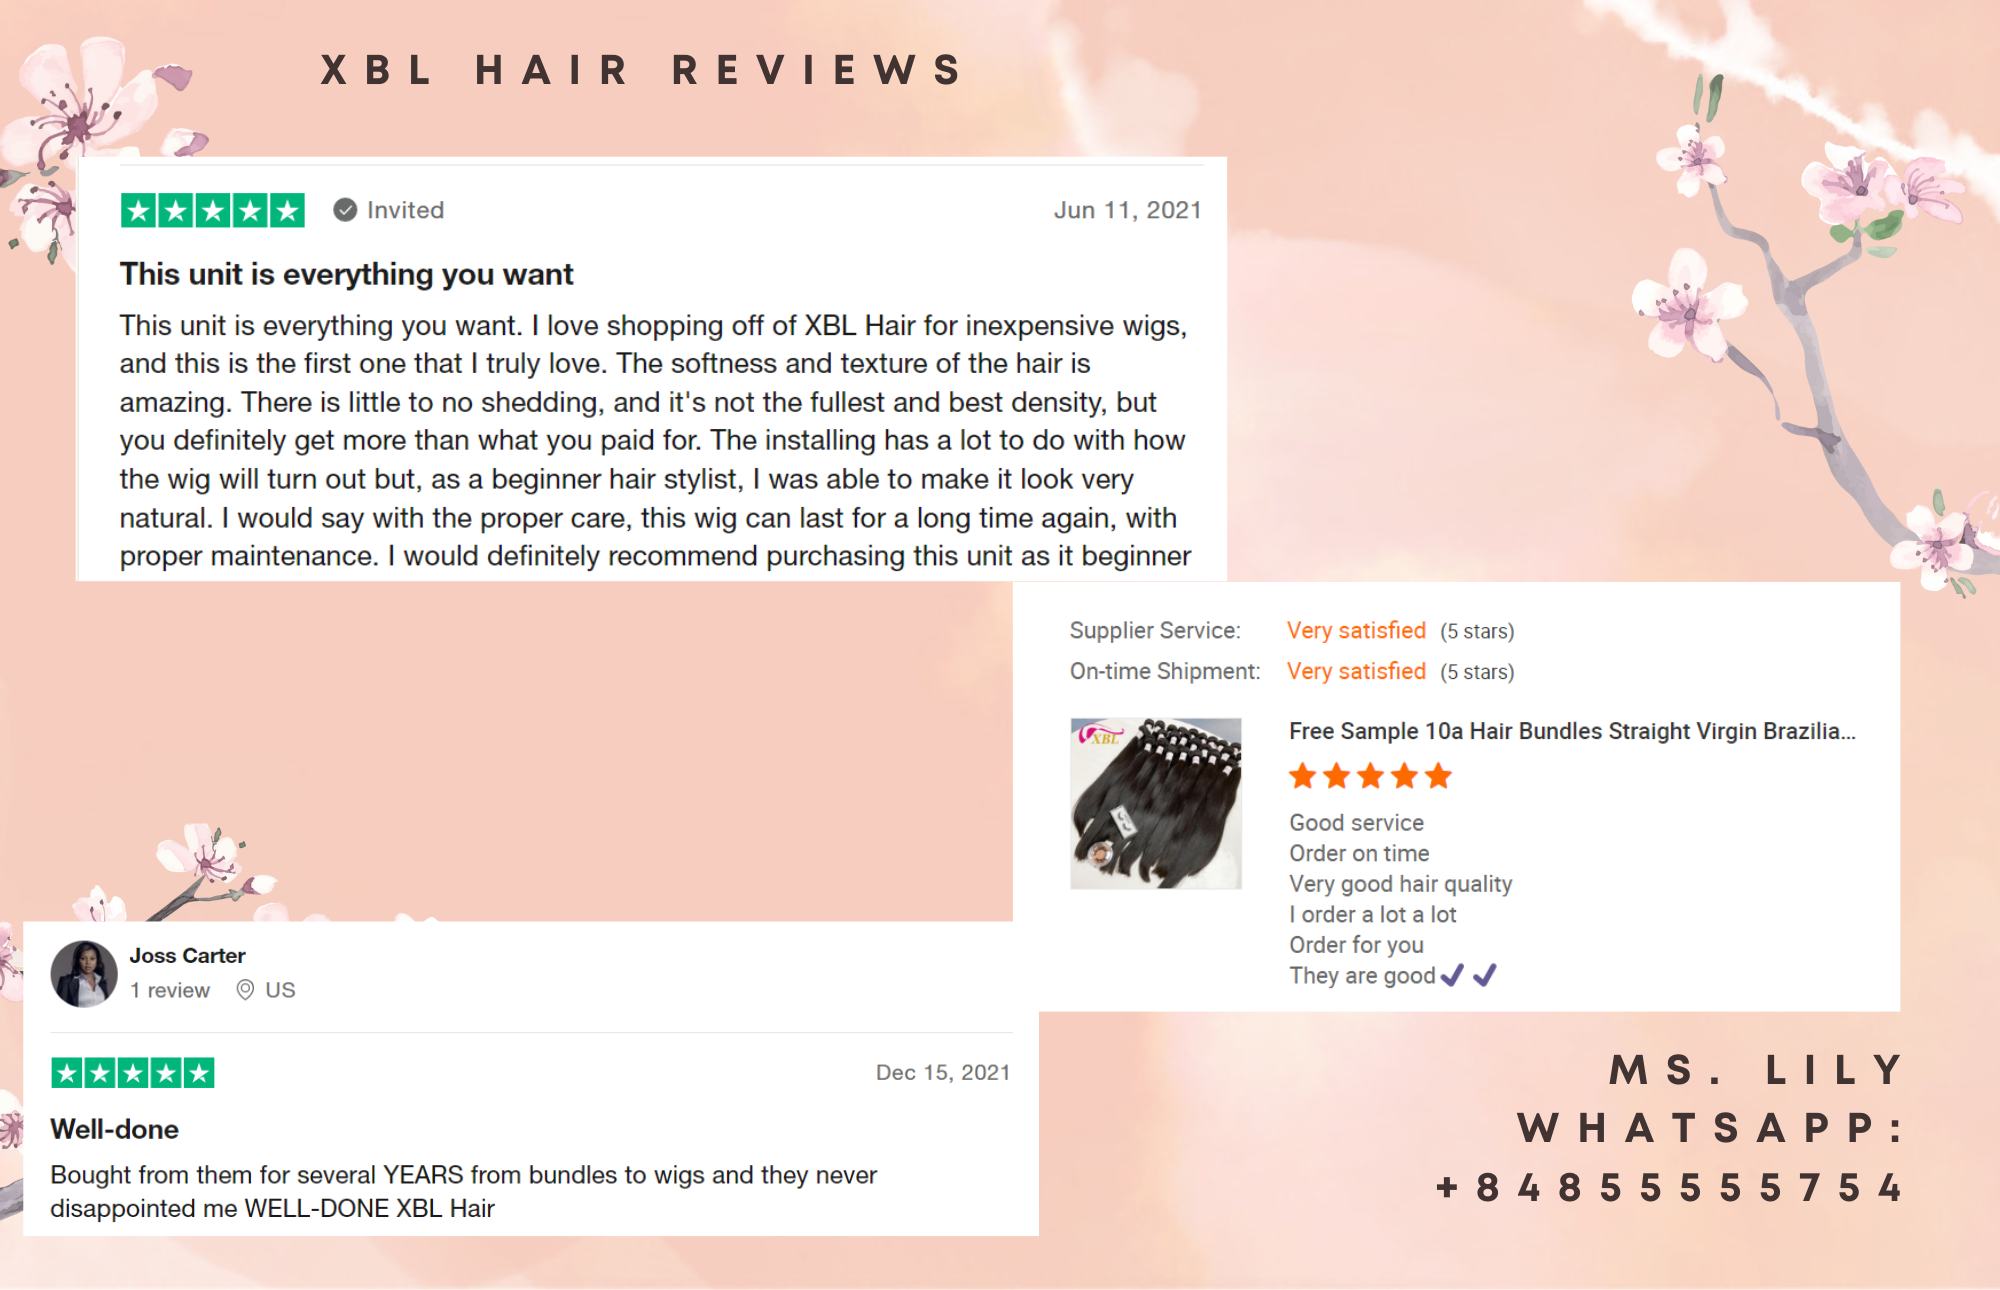 xbl-hair-reviews-essential-if-you-want-to-buy-hair-from-this-brand-30